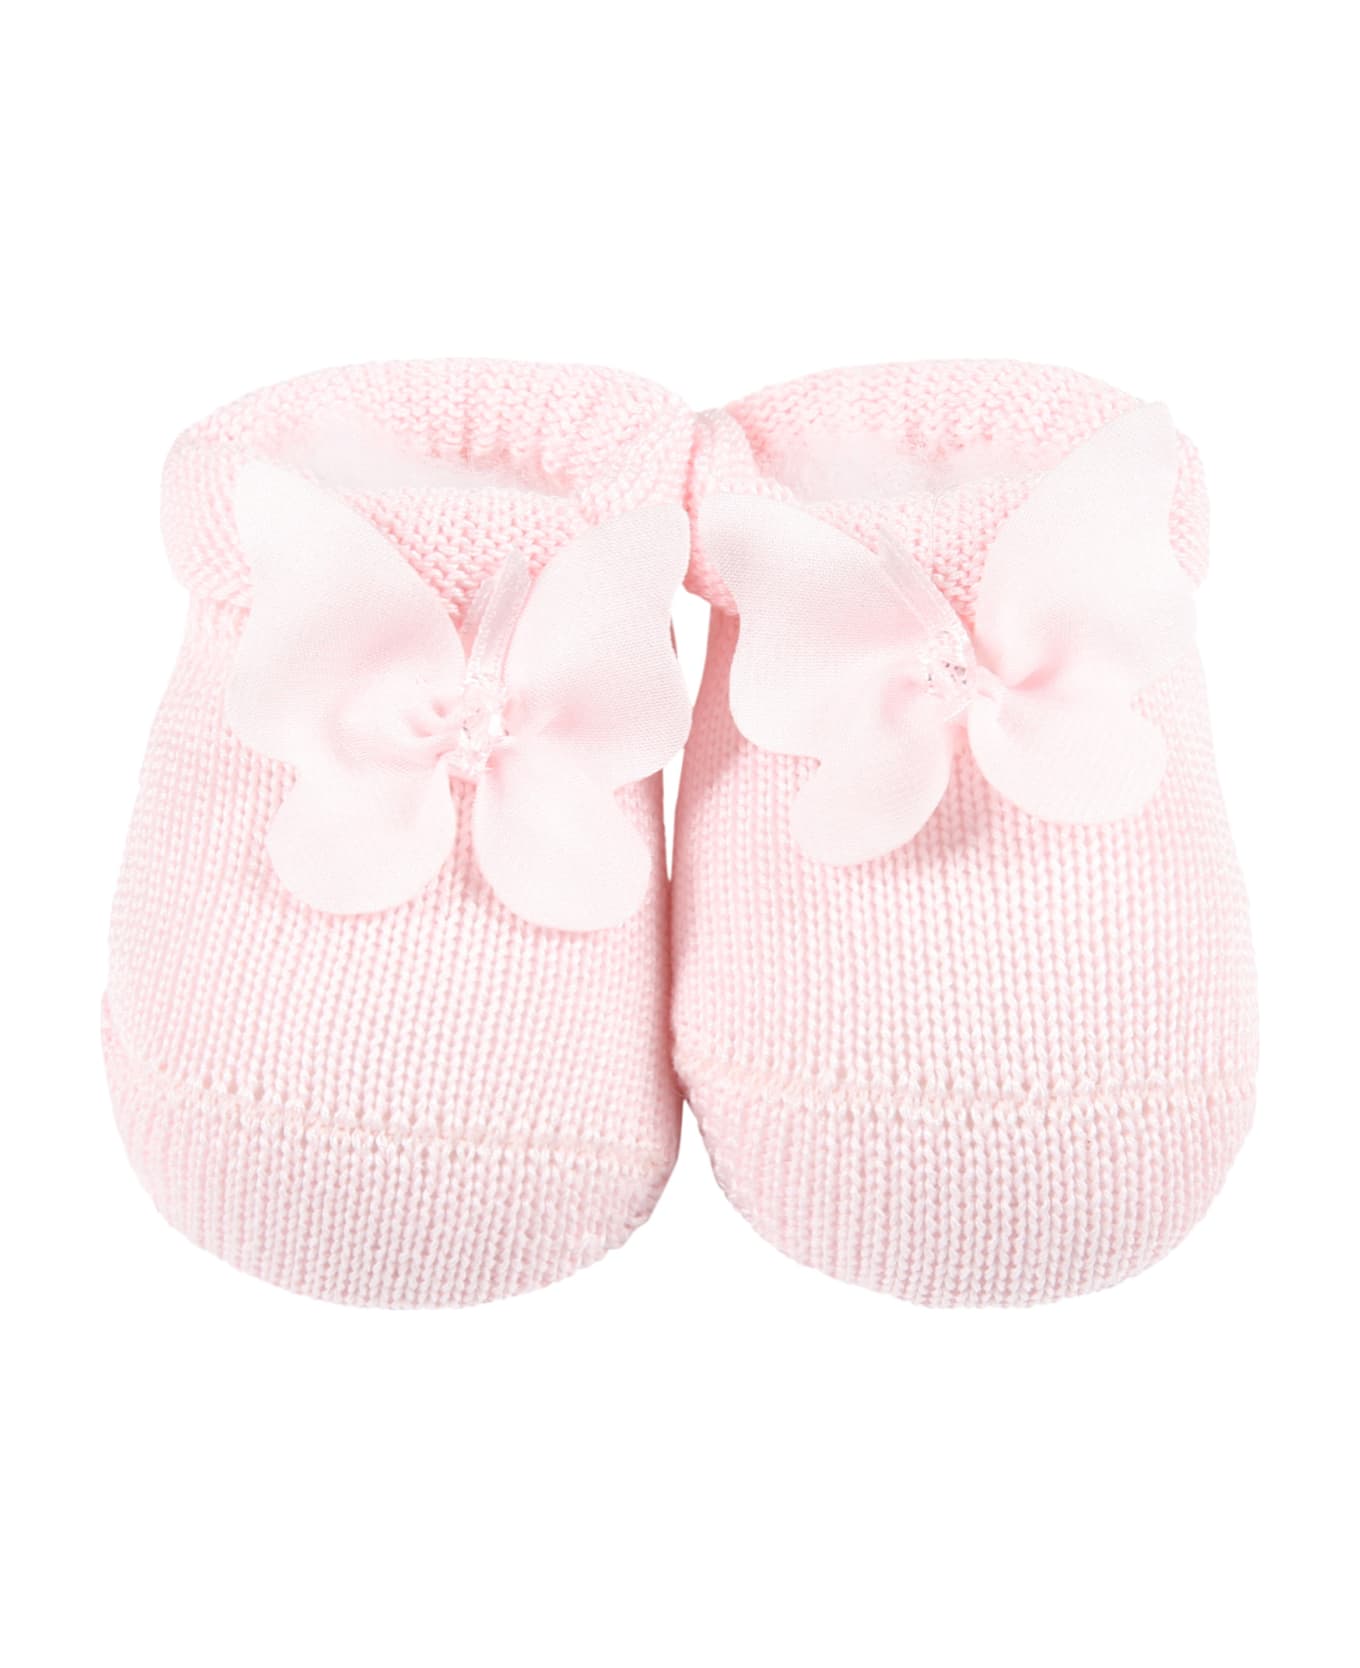 Story Loris Pink Bootee For Baby Girl - Pink アクセサリー＆ギフト